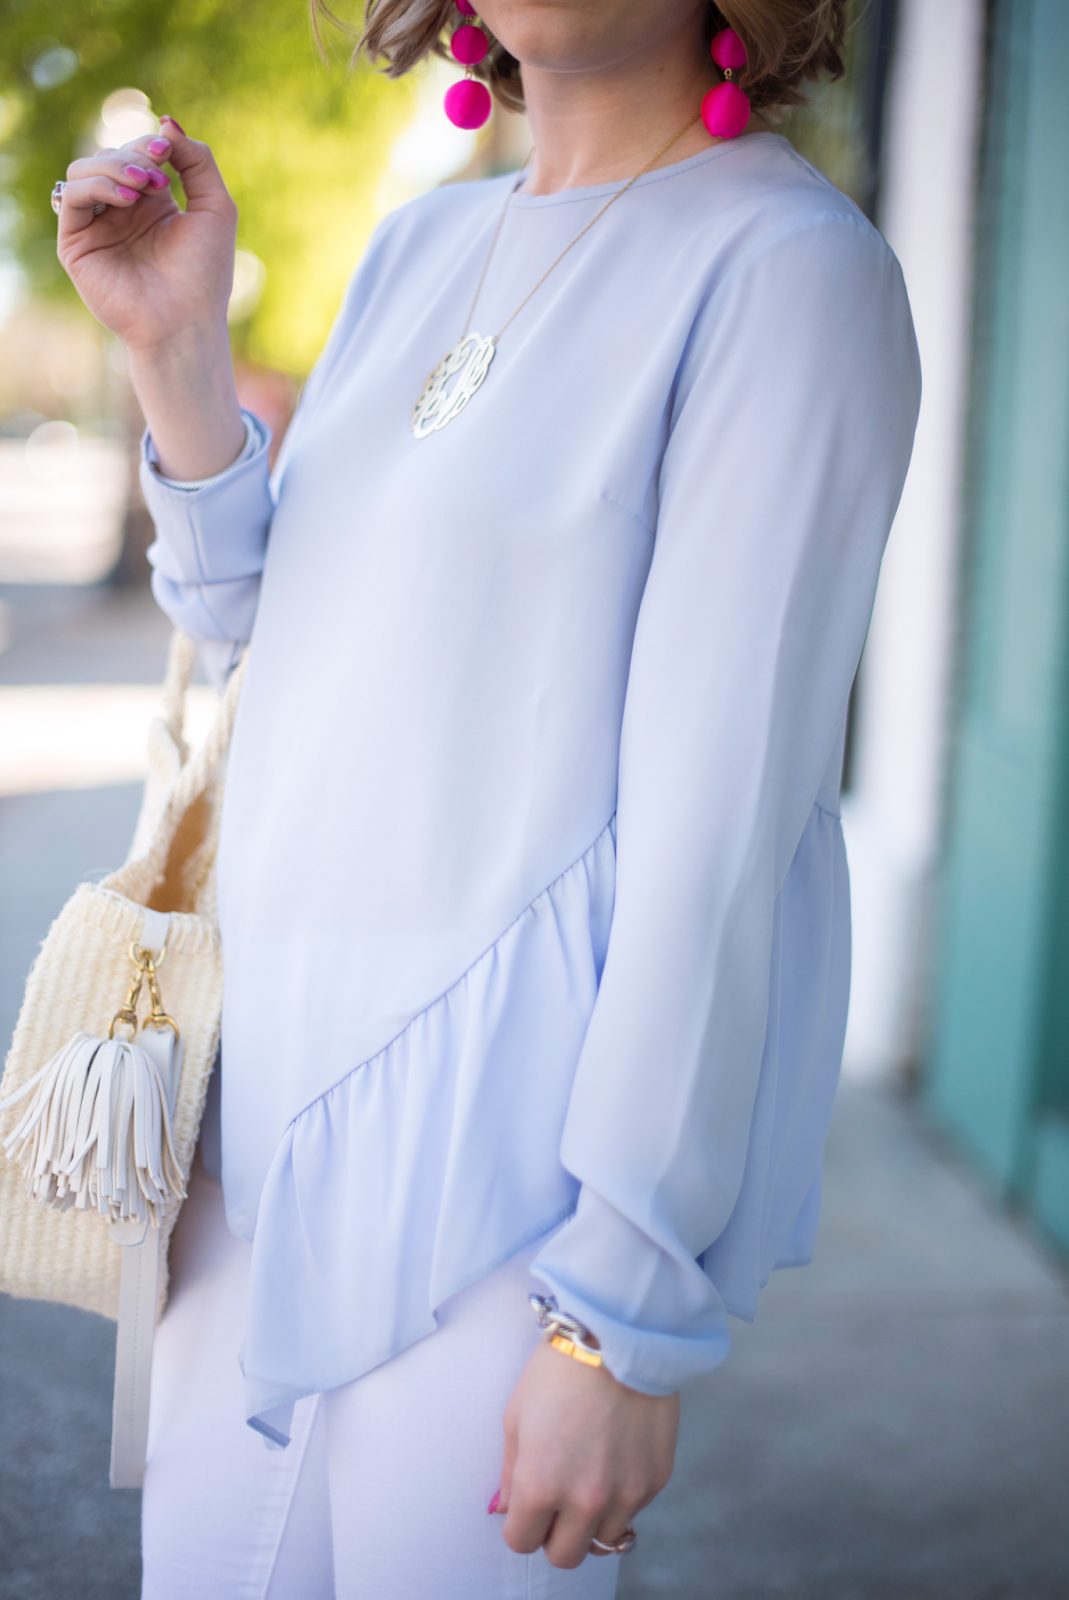 Ruffle hem top for spring  - Click through to see more on Something Delightful Blog